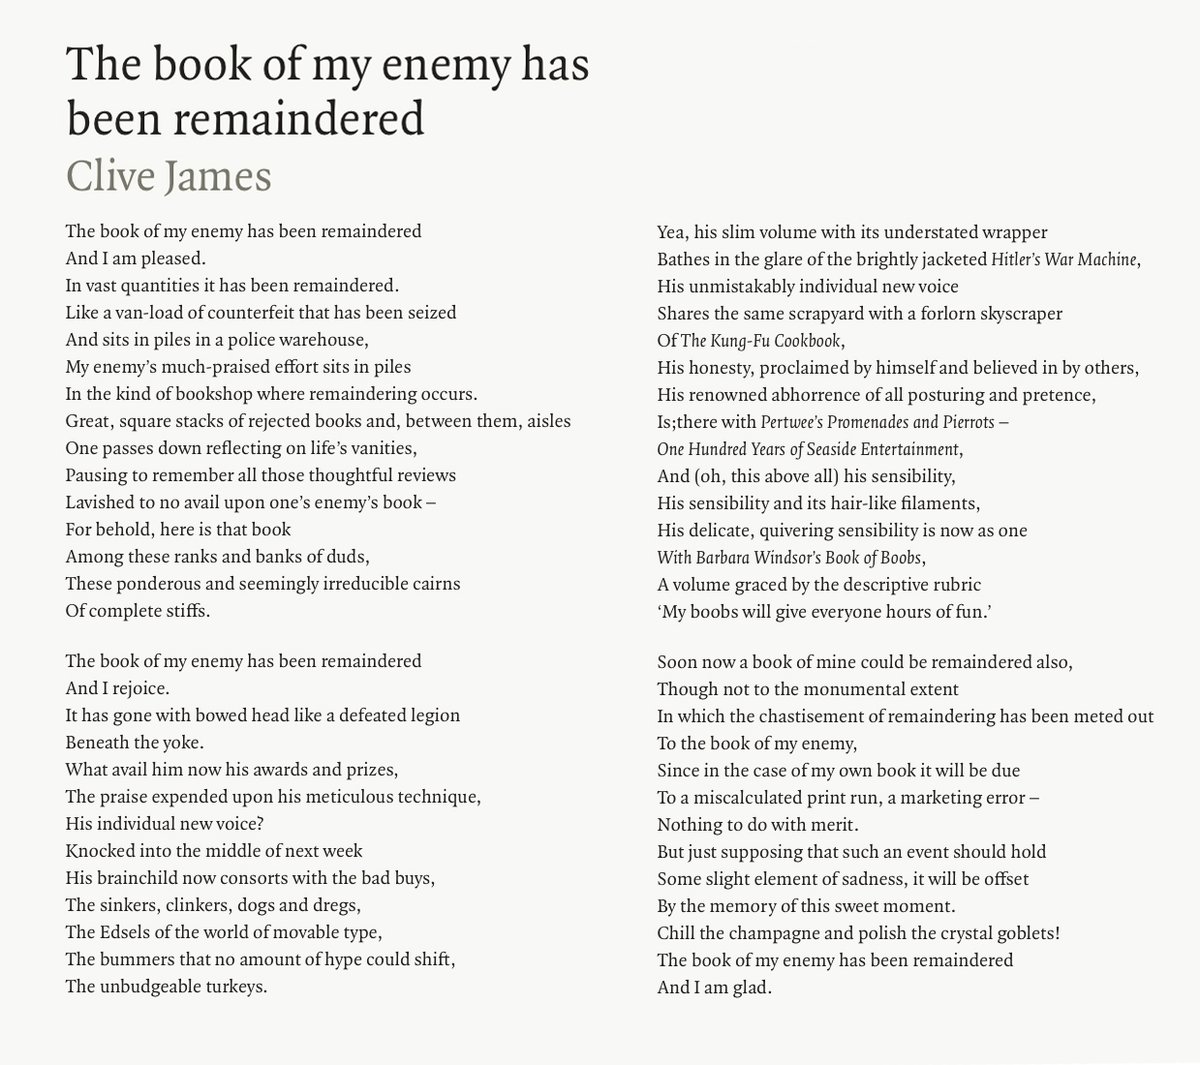 67 The Book Of My Enemy Has Been Remaindered by Clive James, read by Deborah Frances-White  @DeborahFW  #PandemicPoems  https://soundcloud.com/user-115260978/67-the-book-of-my-enemy-has-been-remaindered-by-clive-james-read-by-deborah-frances-white